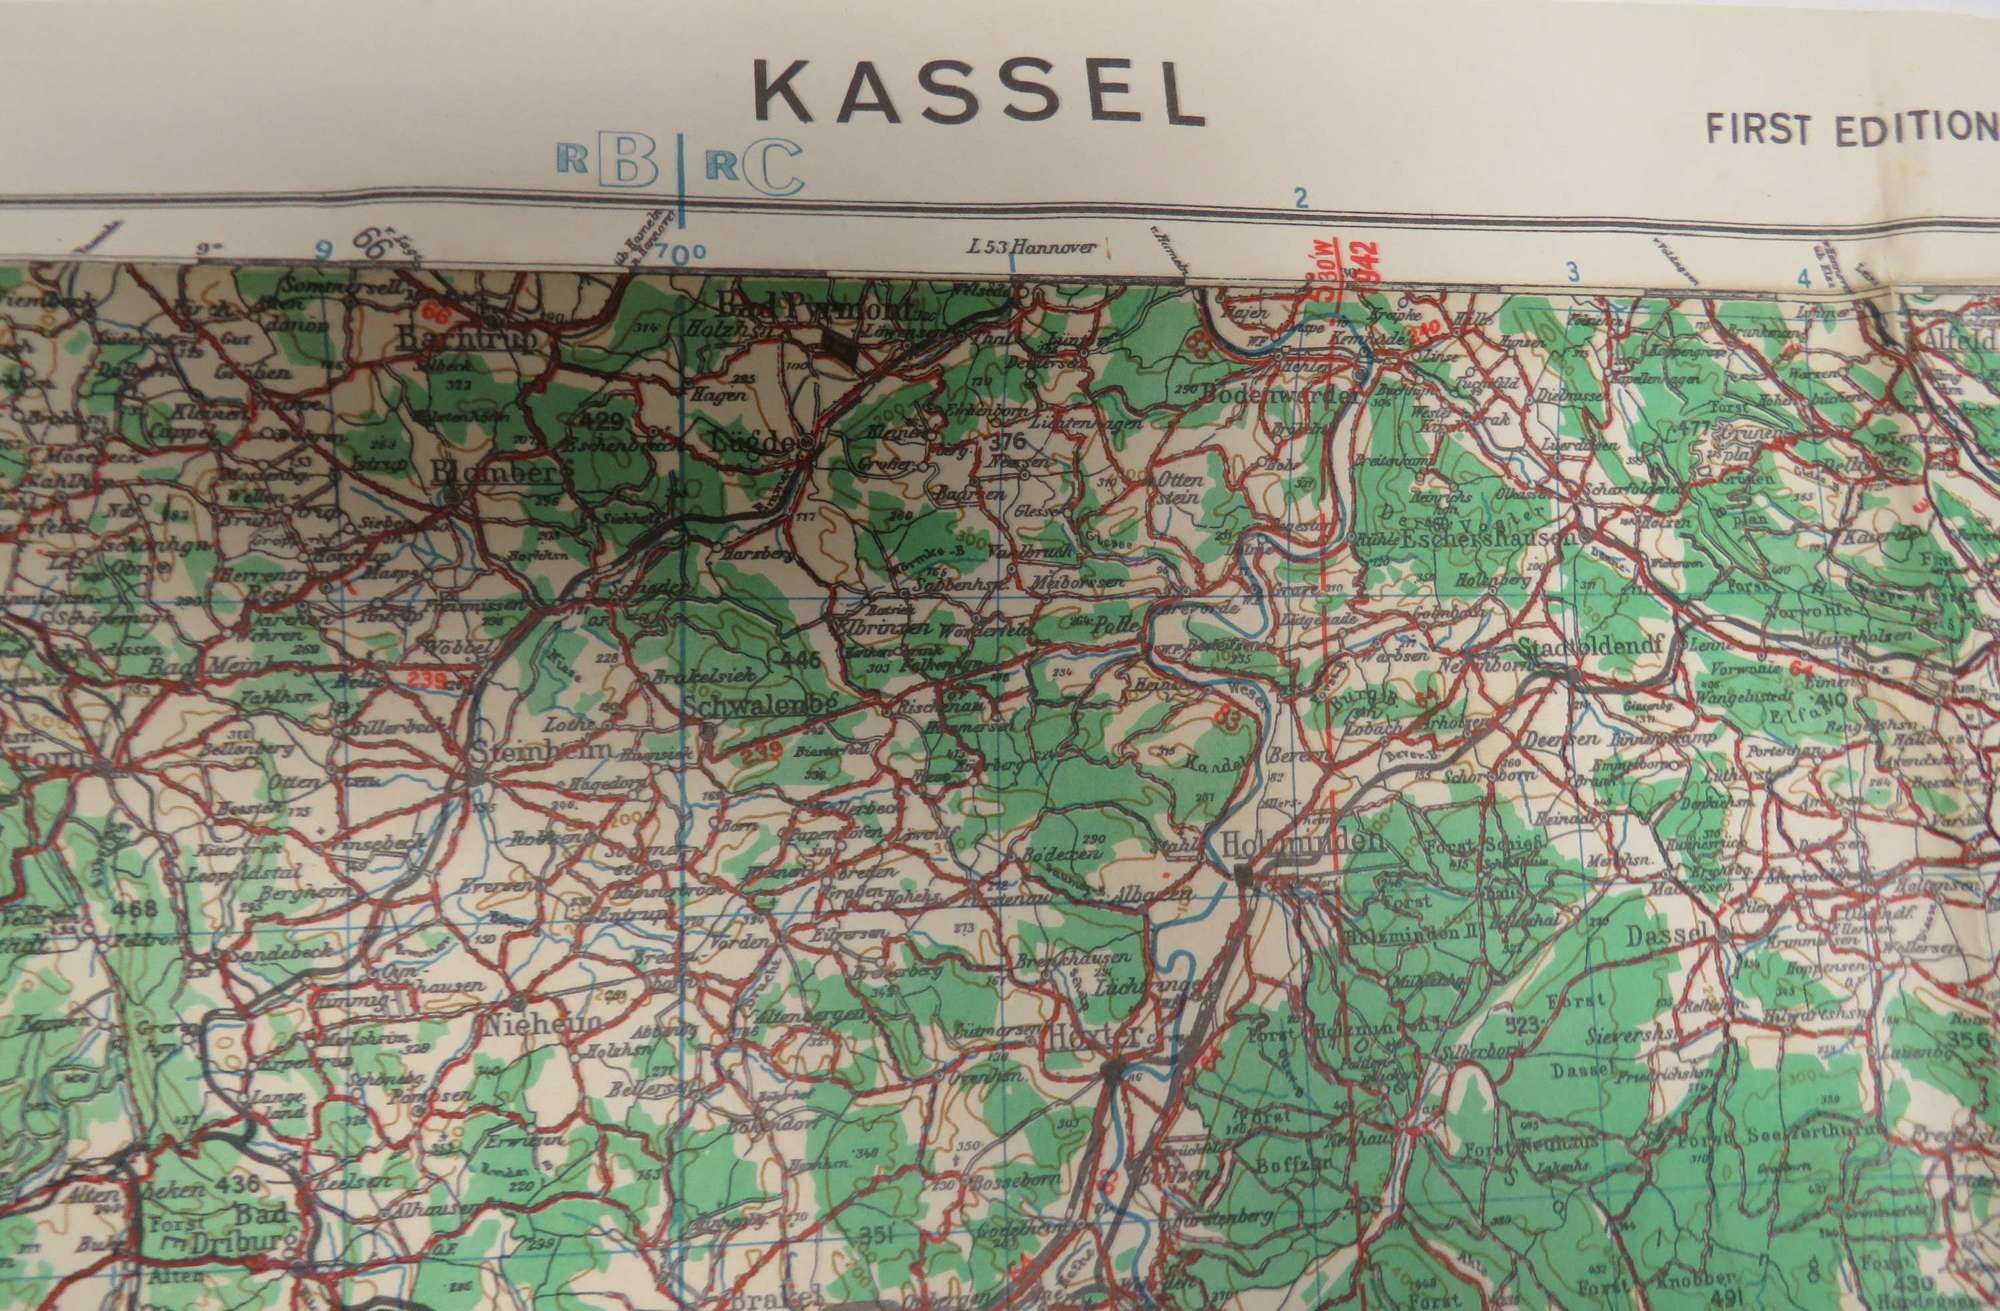 WW2 Army / Air Map Covering Kassel and the Surrounding Area